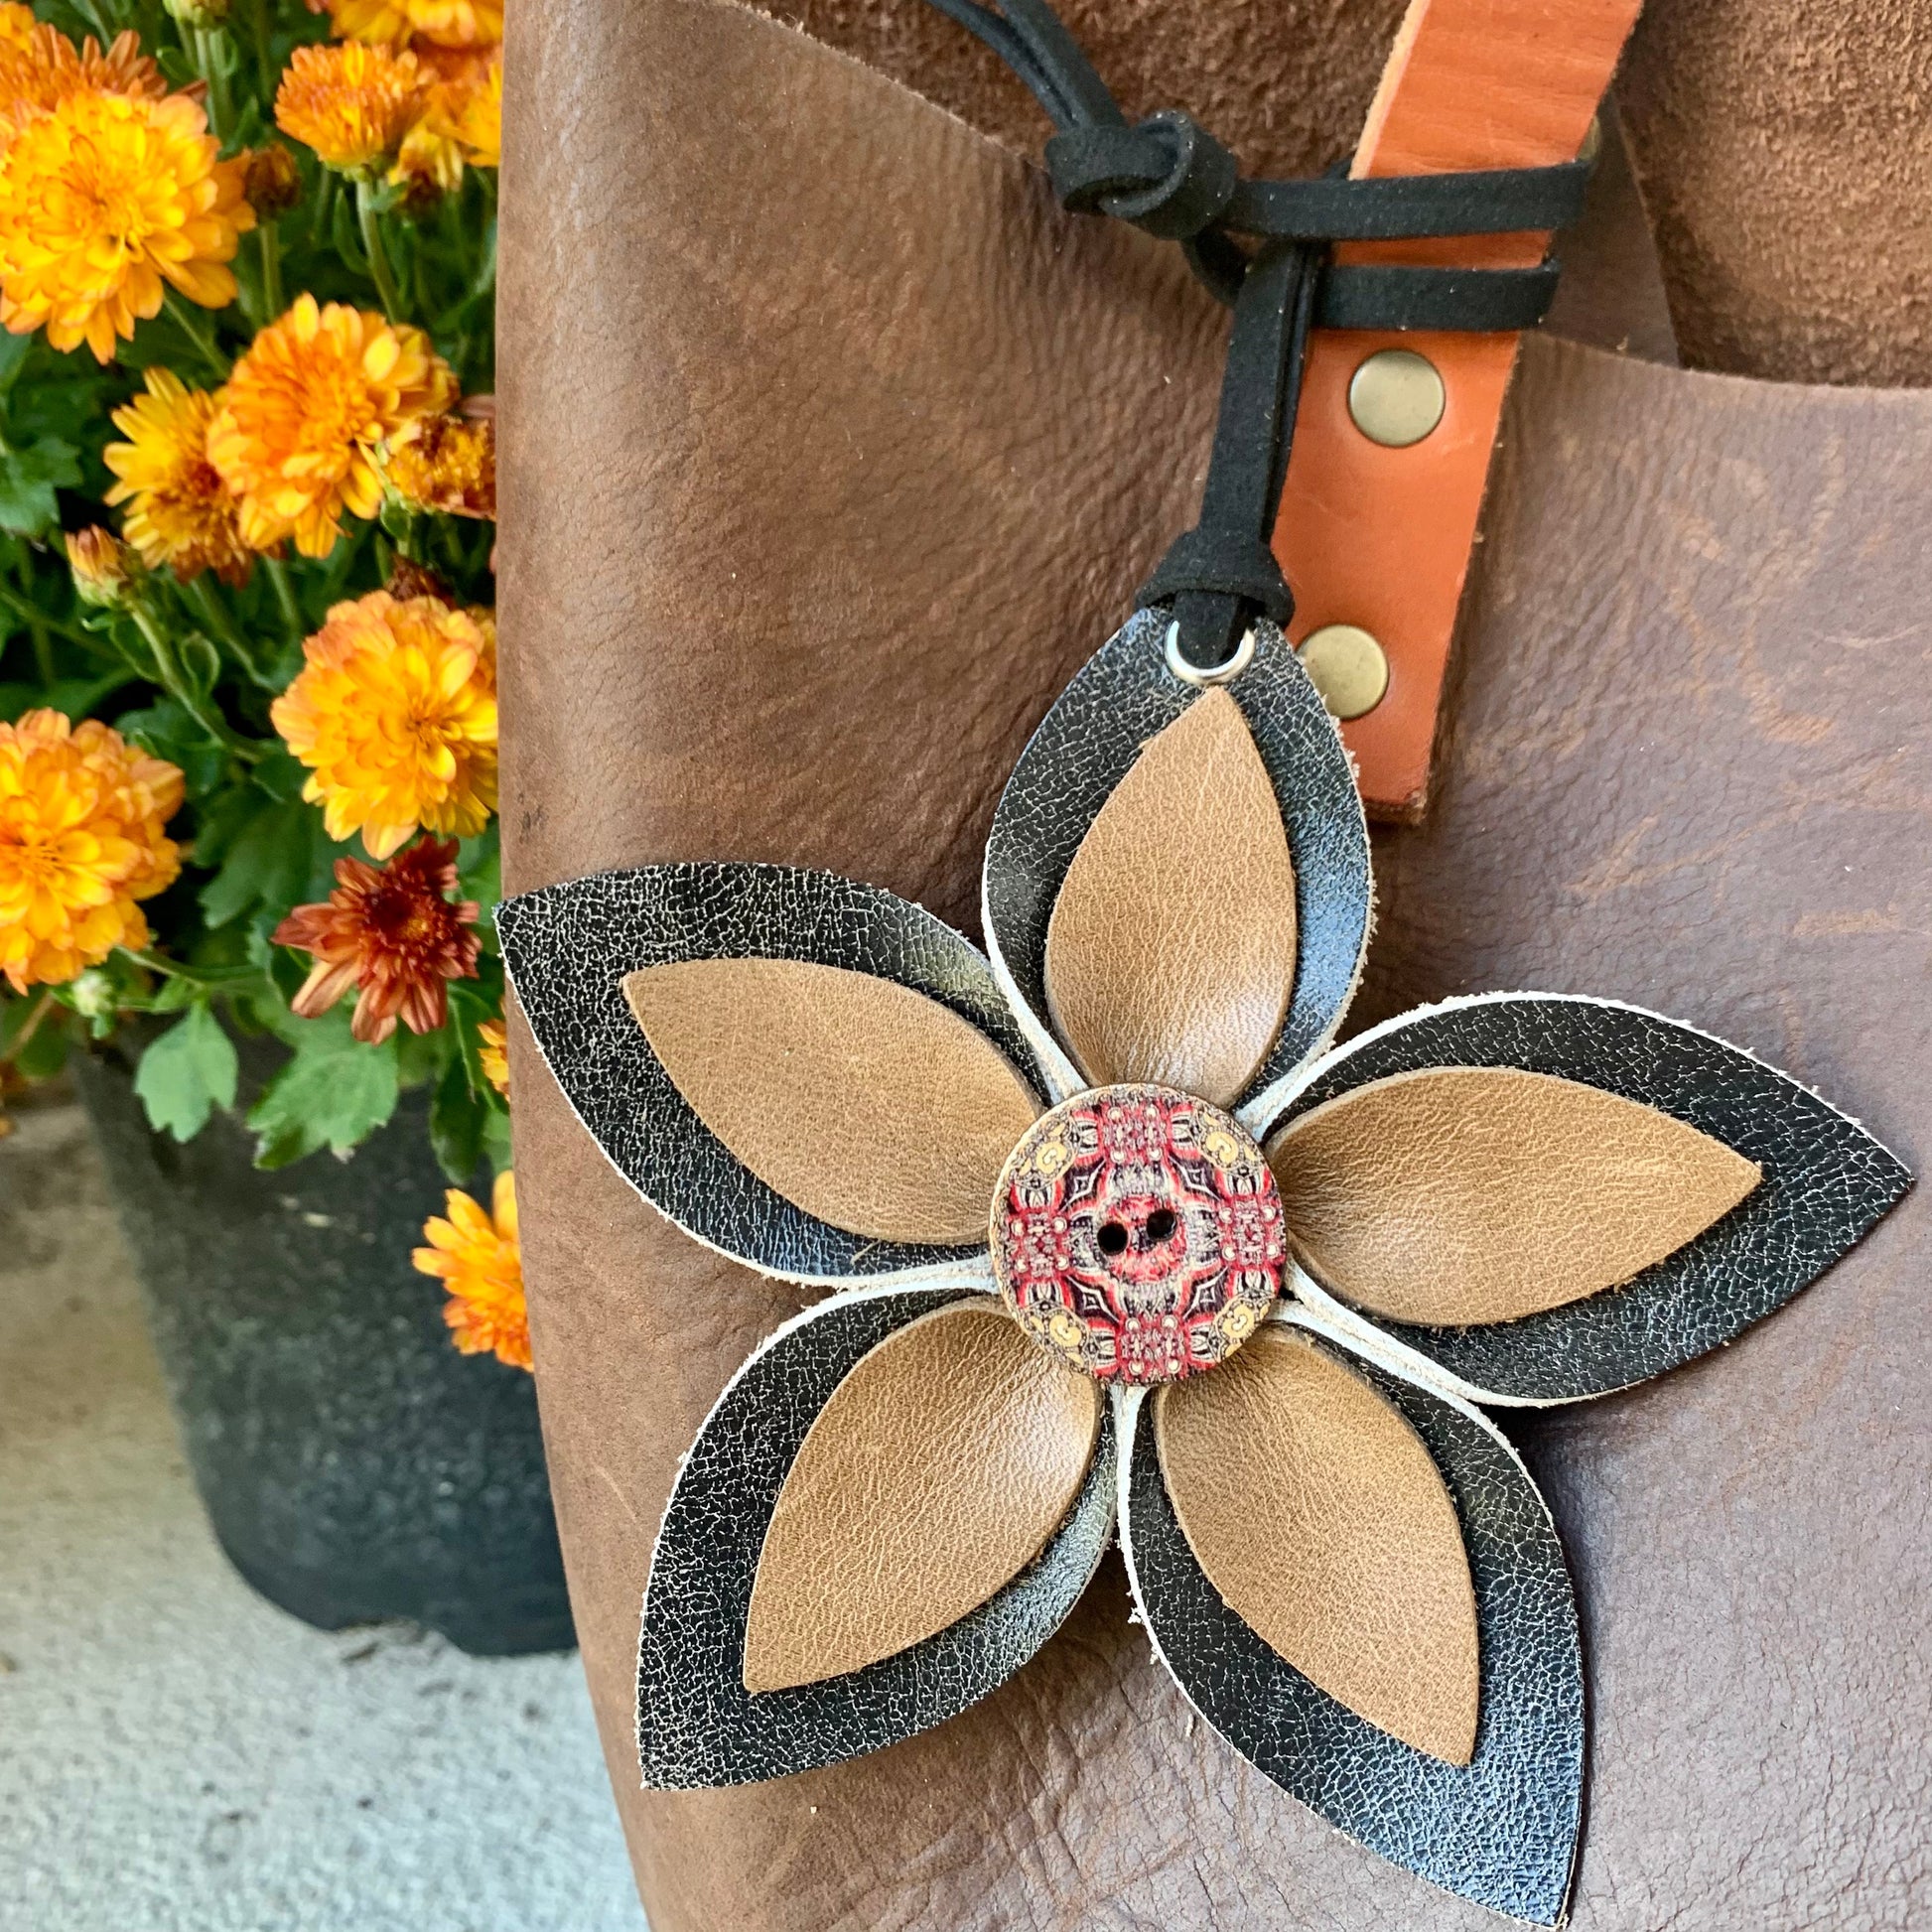 Leather Purse Charms - Colorful Flowers – lindsaystreemdesigns